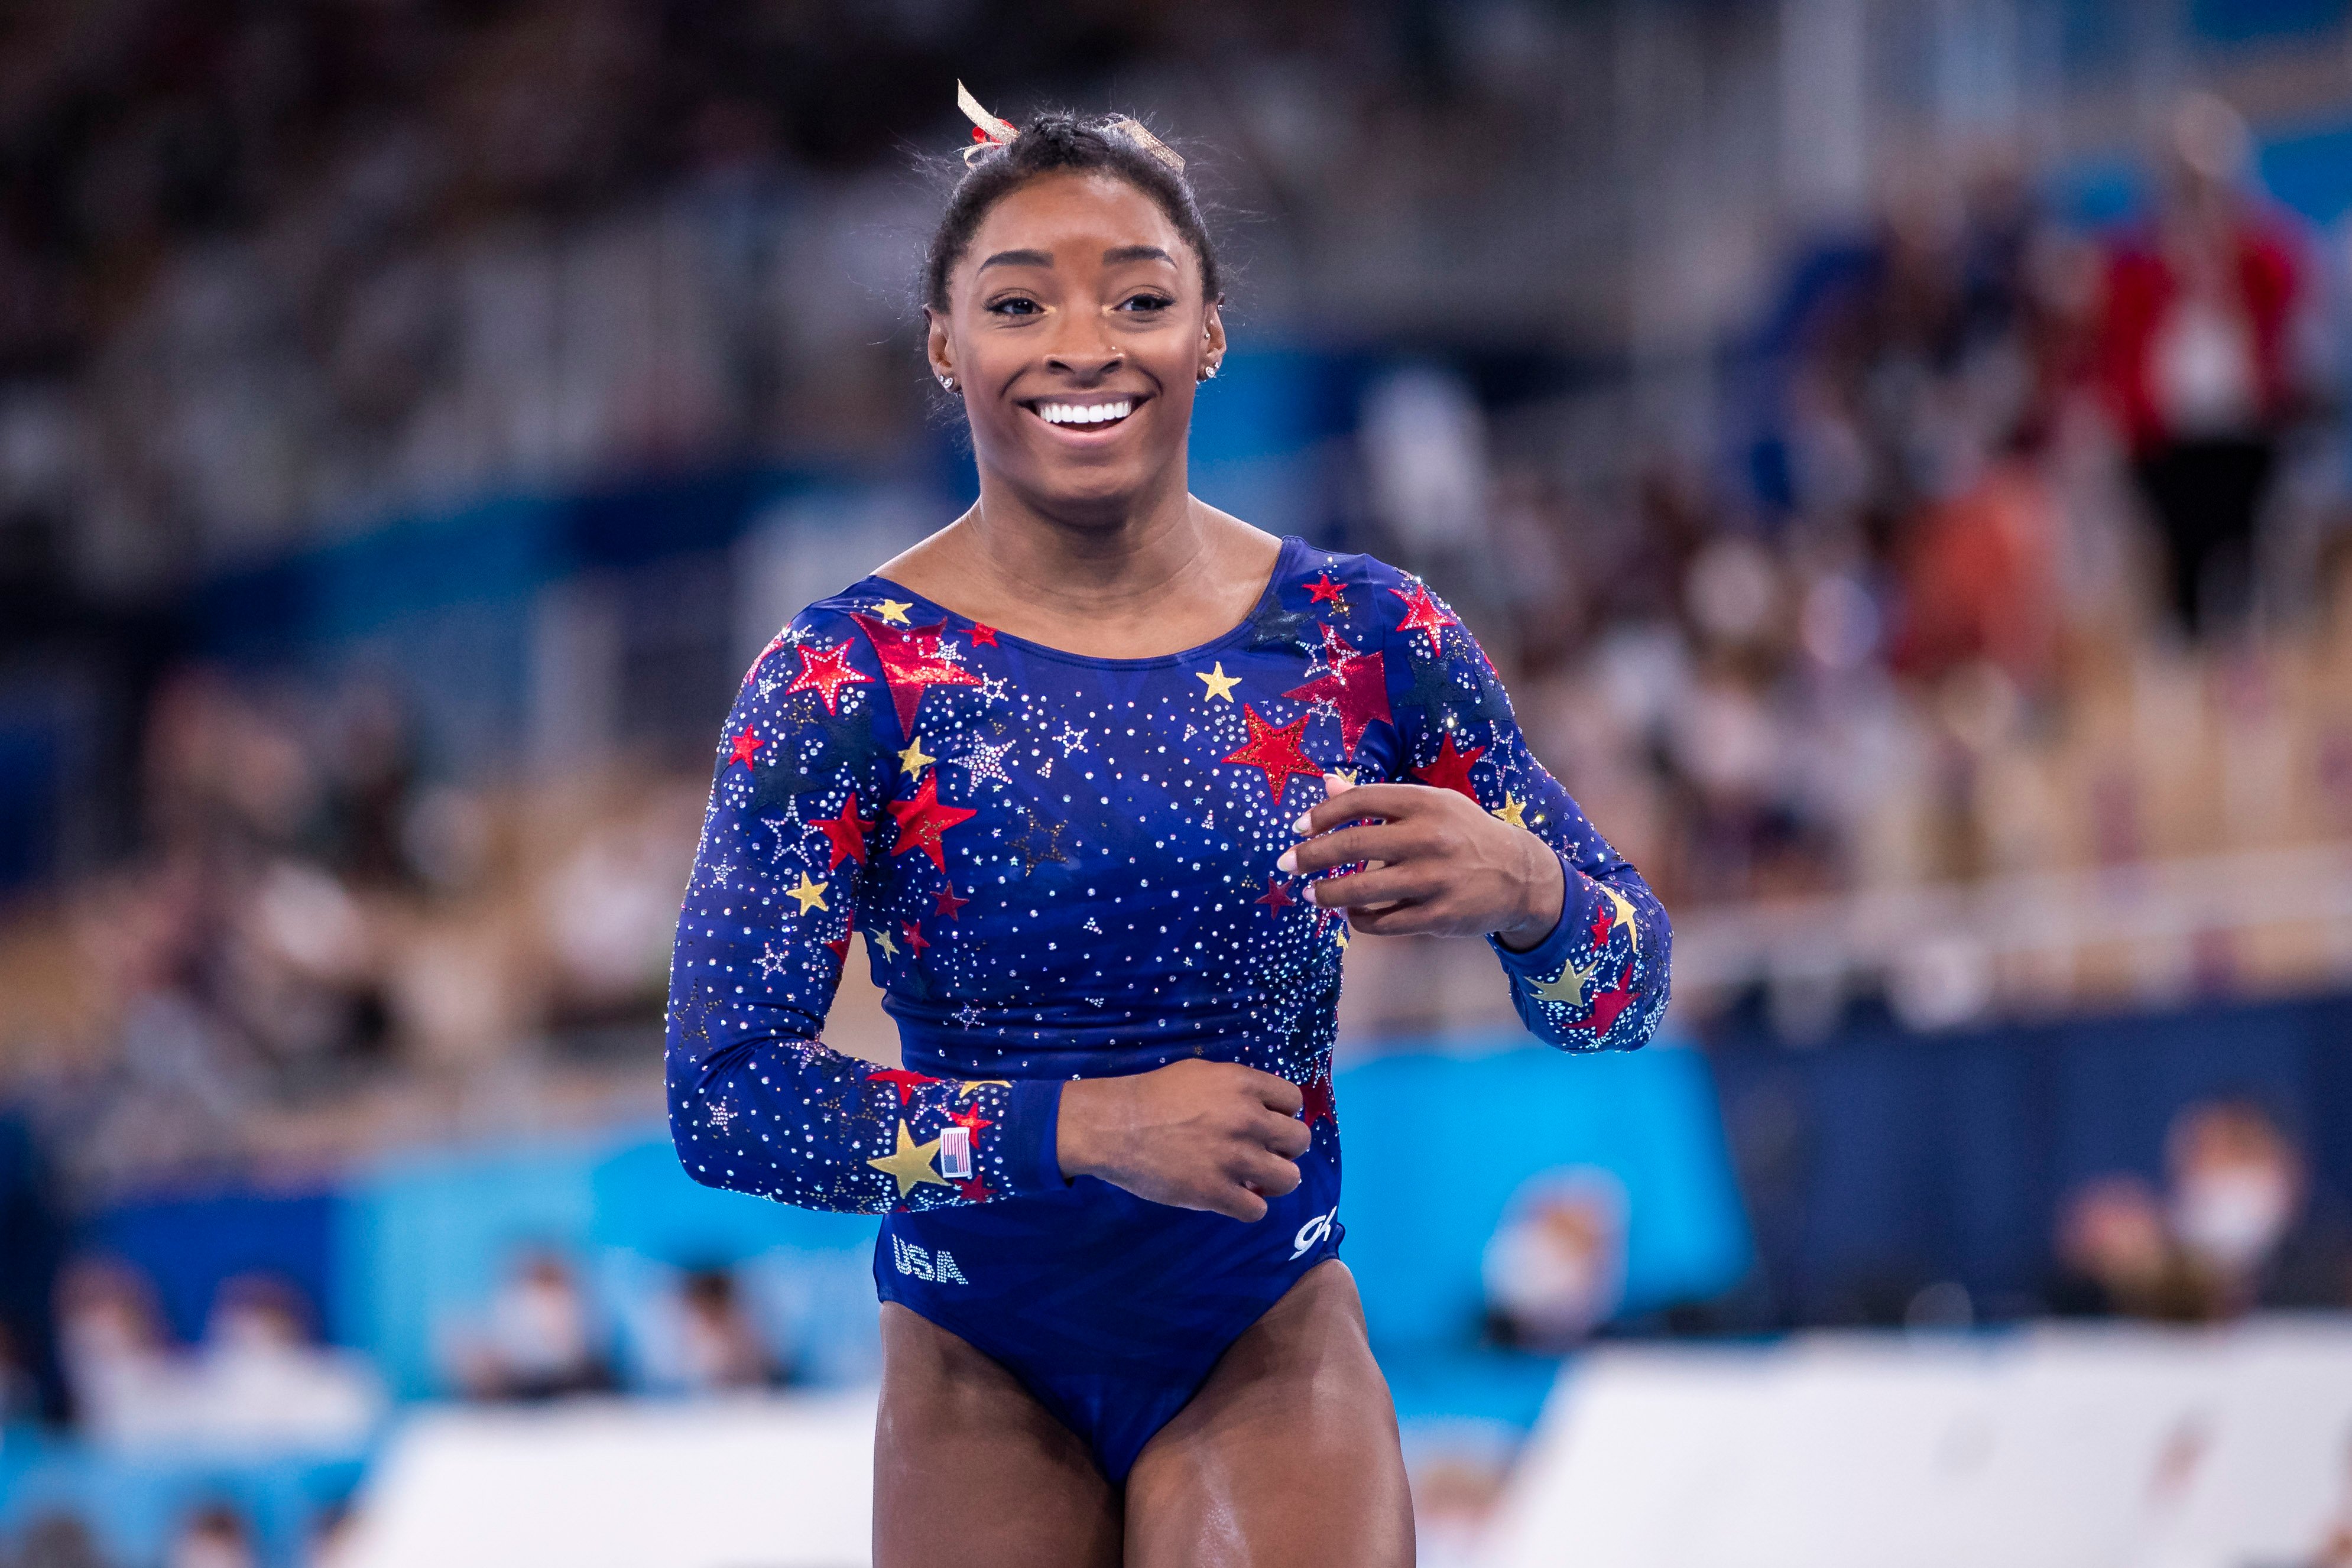 Simone Biles smiles during the qualification round of the women's gymnastics in Tokyo